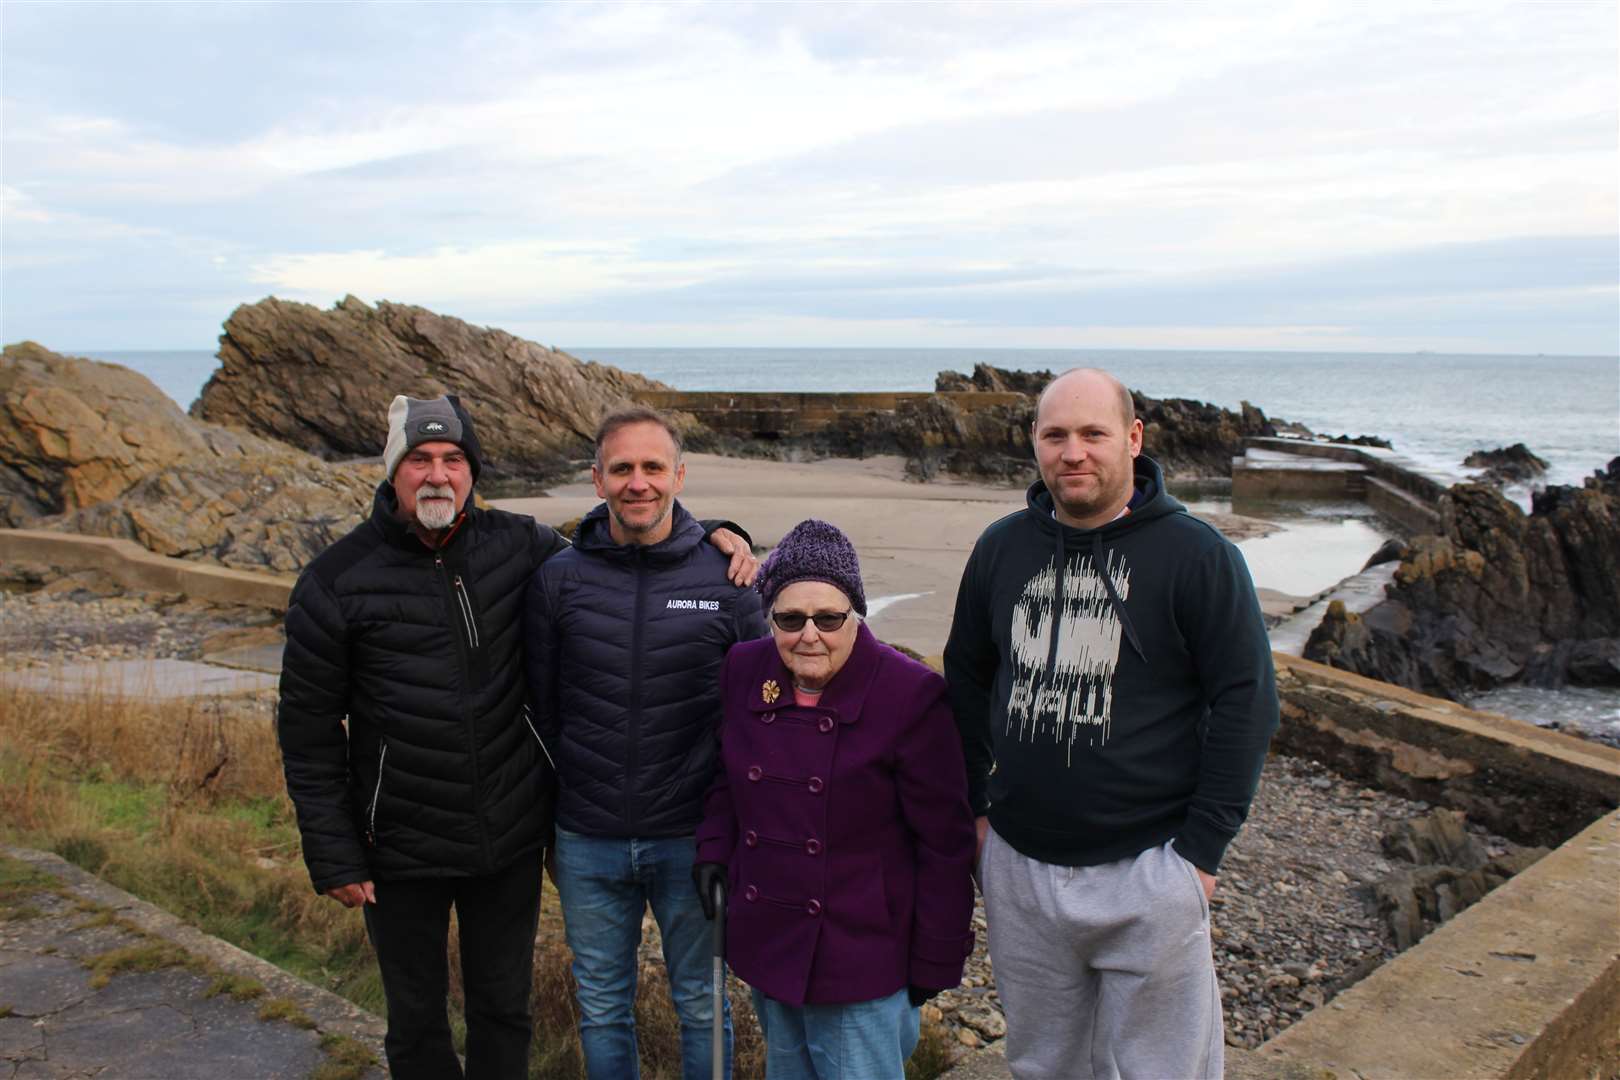 A community group has commenced work to bring the Portsoy Outdoor Pool back into use.